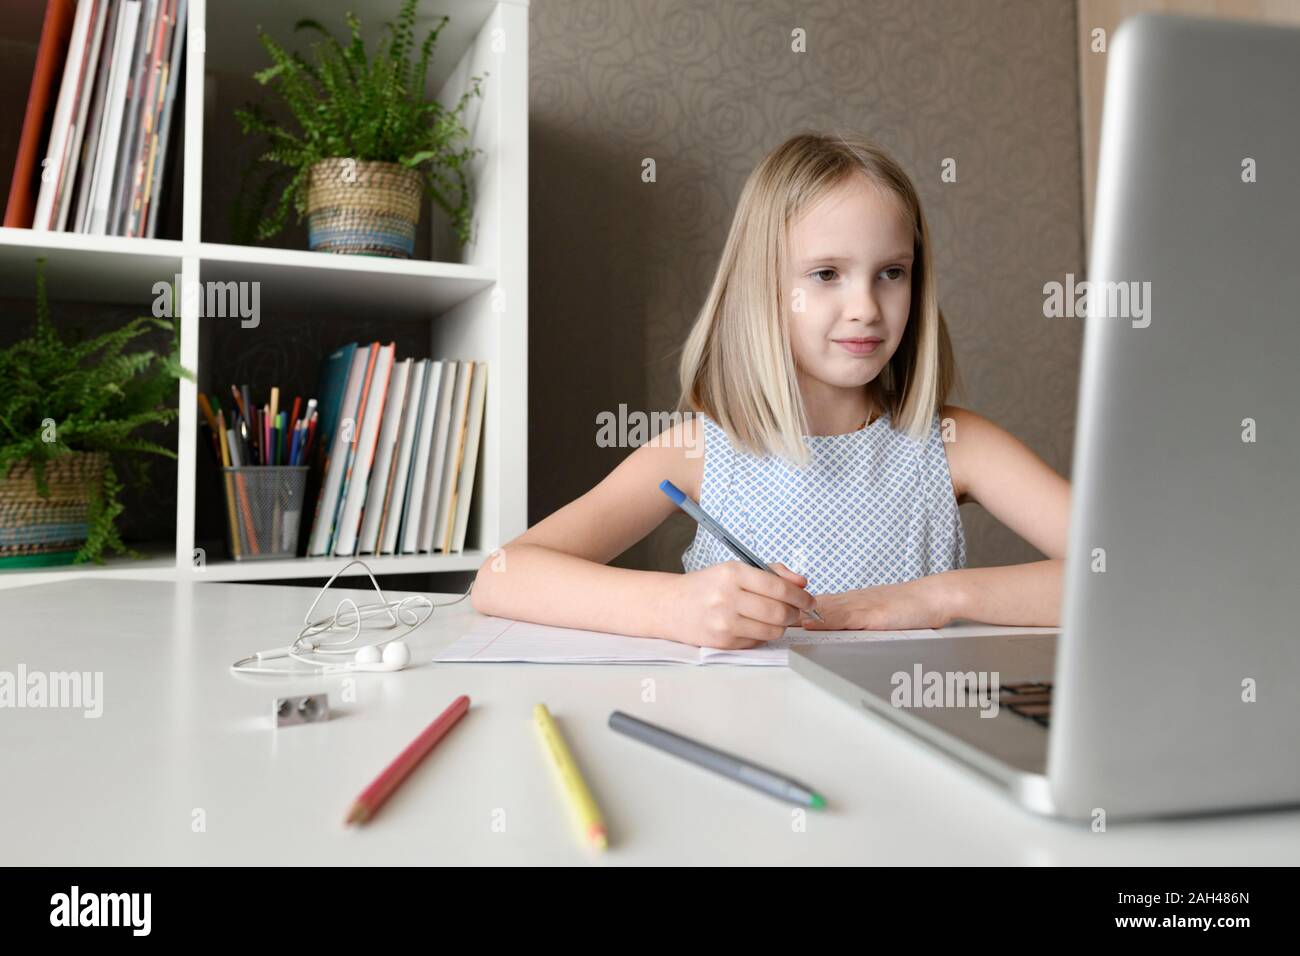 Girl sitting at table at home doing homework and using laptop Stock Photo